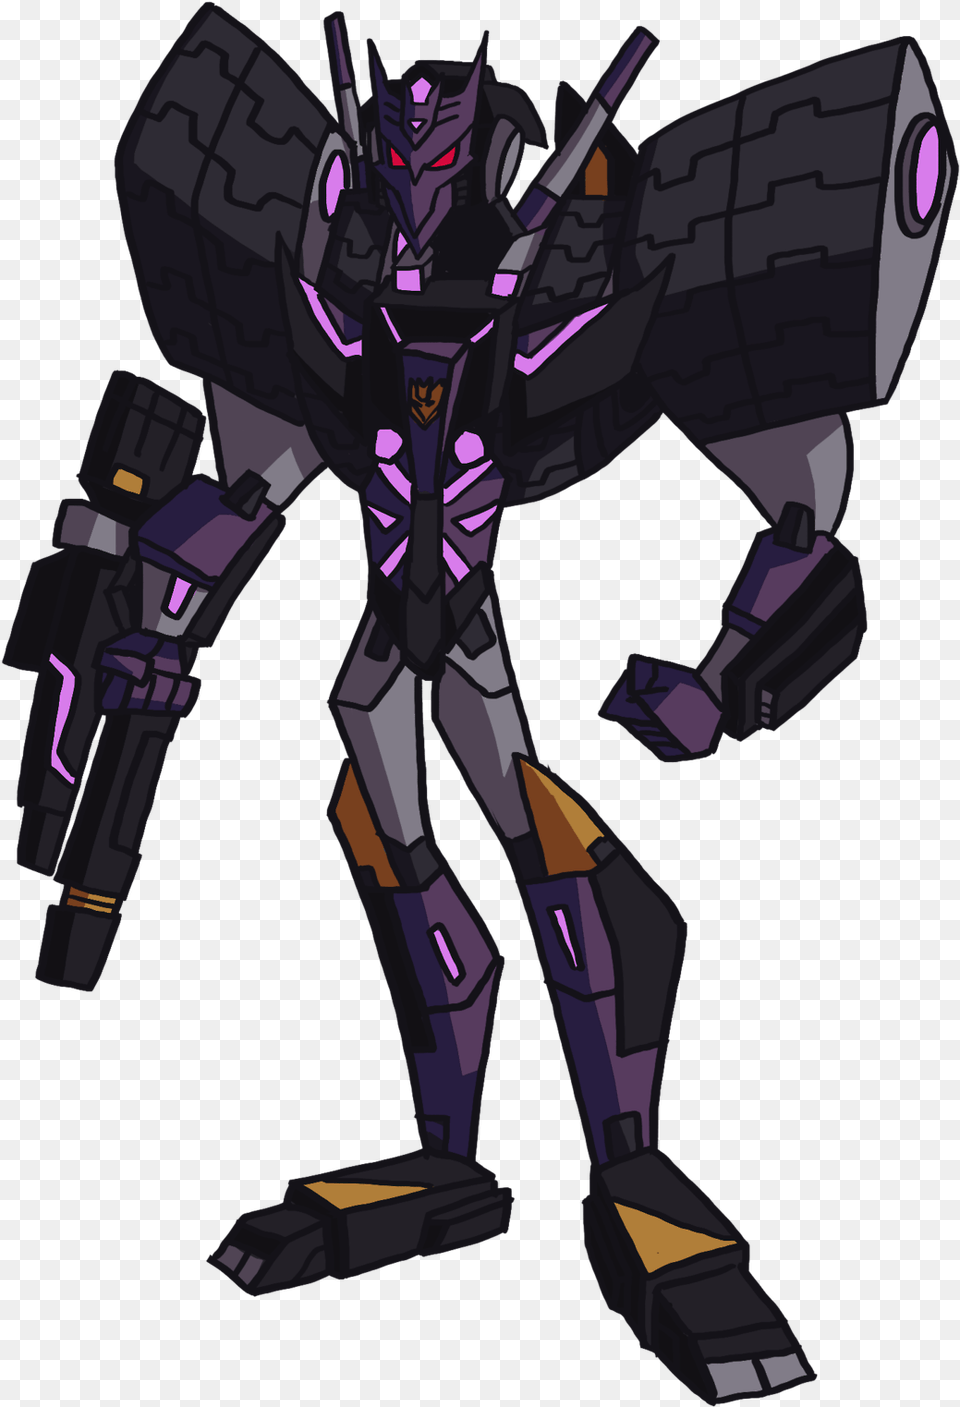 After Drawing Kaon In Tfa Style Why Not Military Robot Free Transparent Png